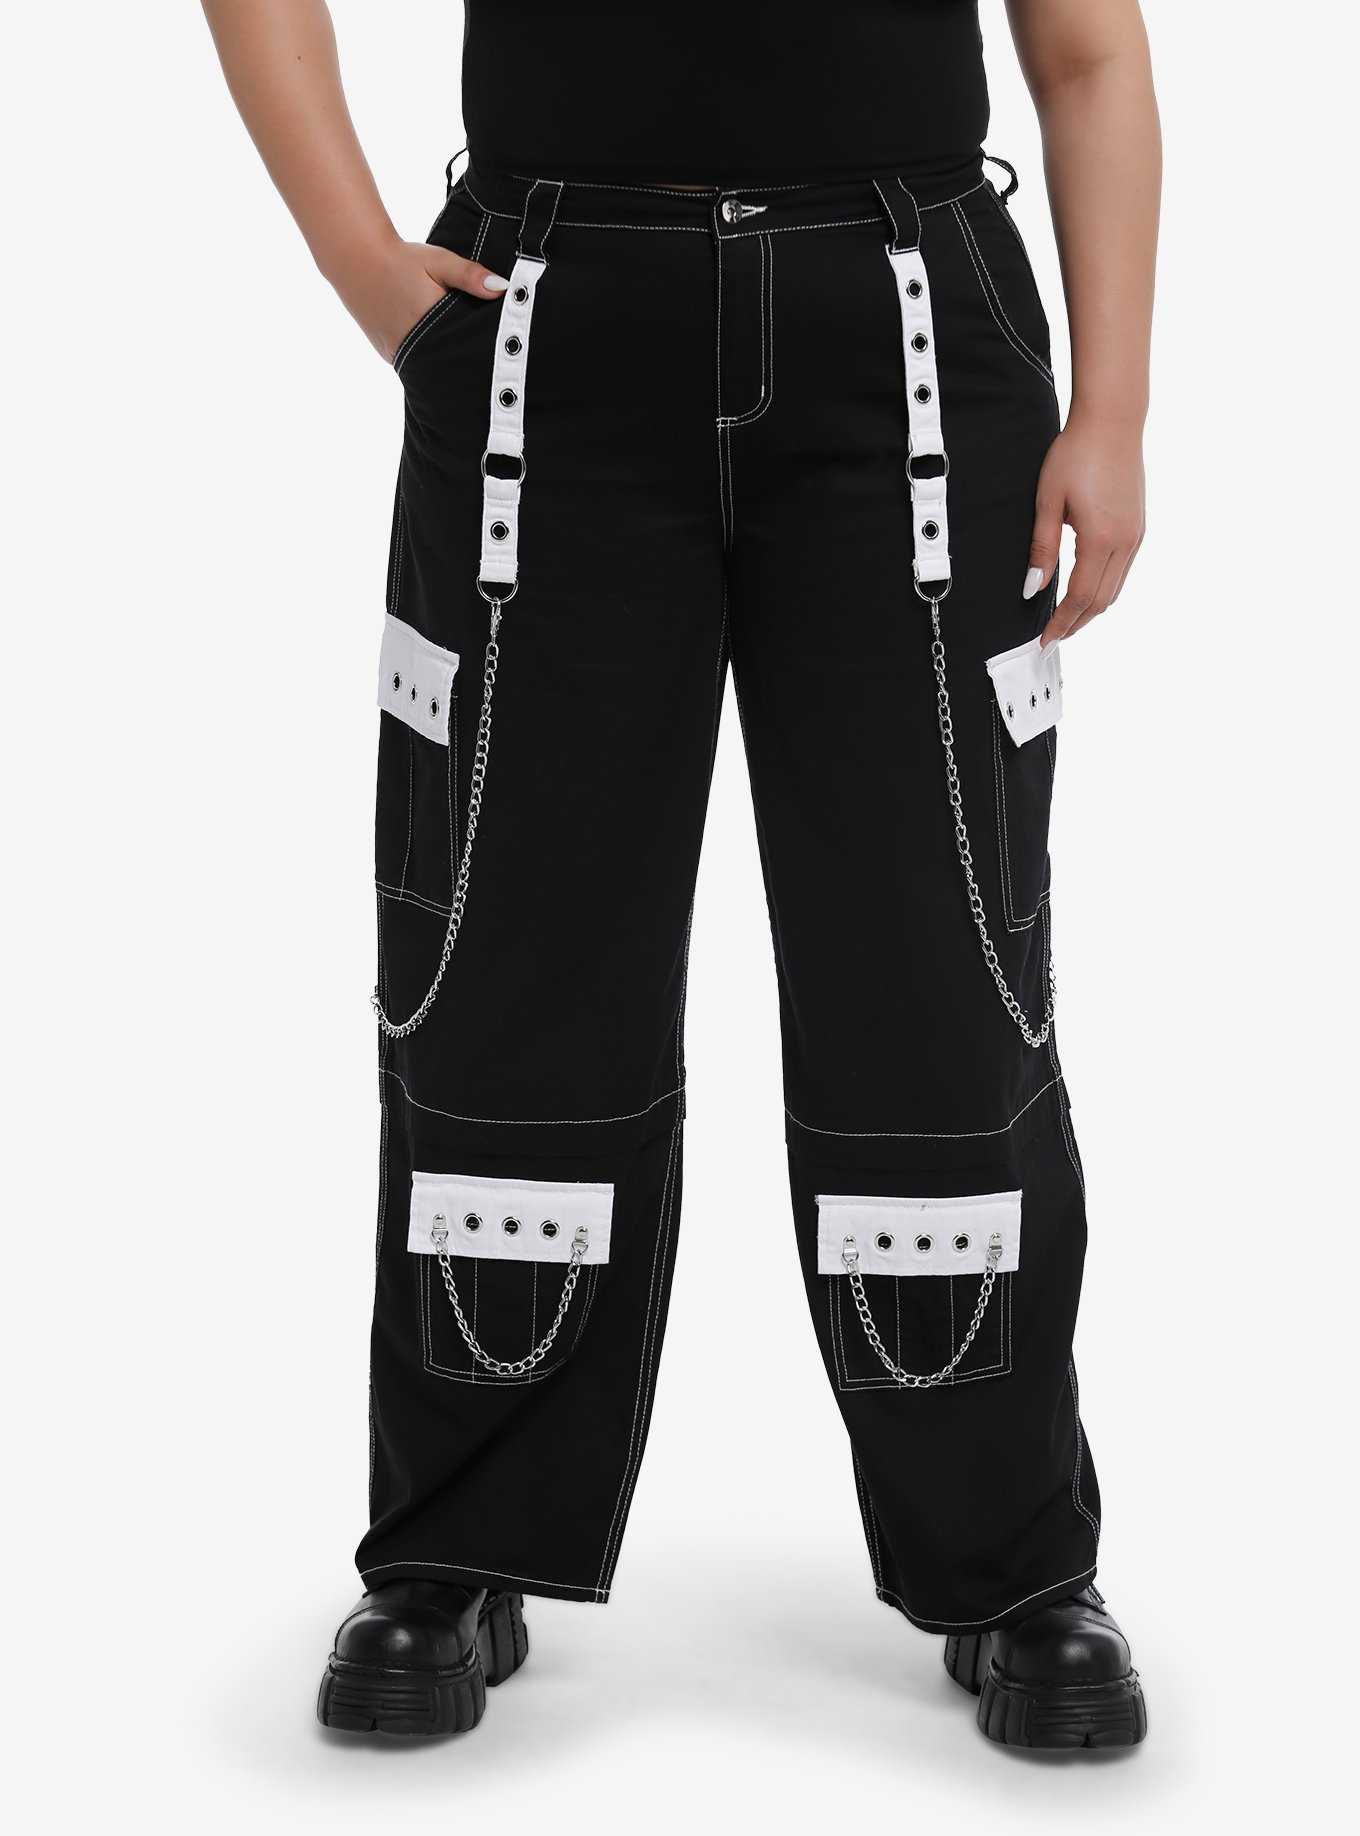 Forget Jncos. Remember Hot Topic Tripp chain pants? : r/Xennials